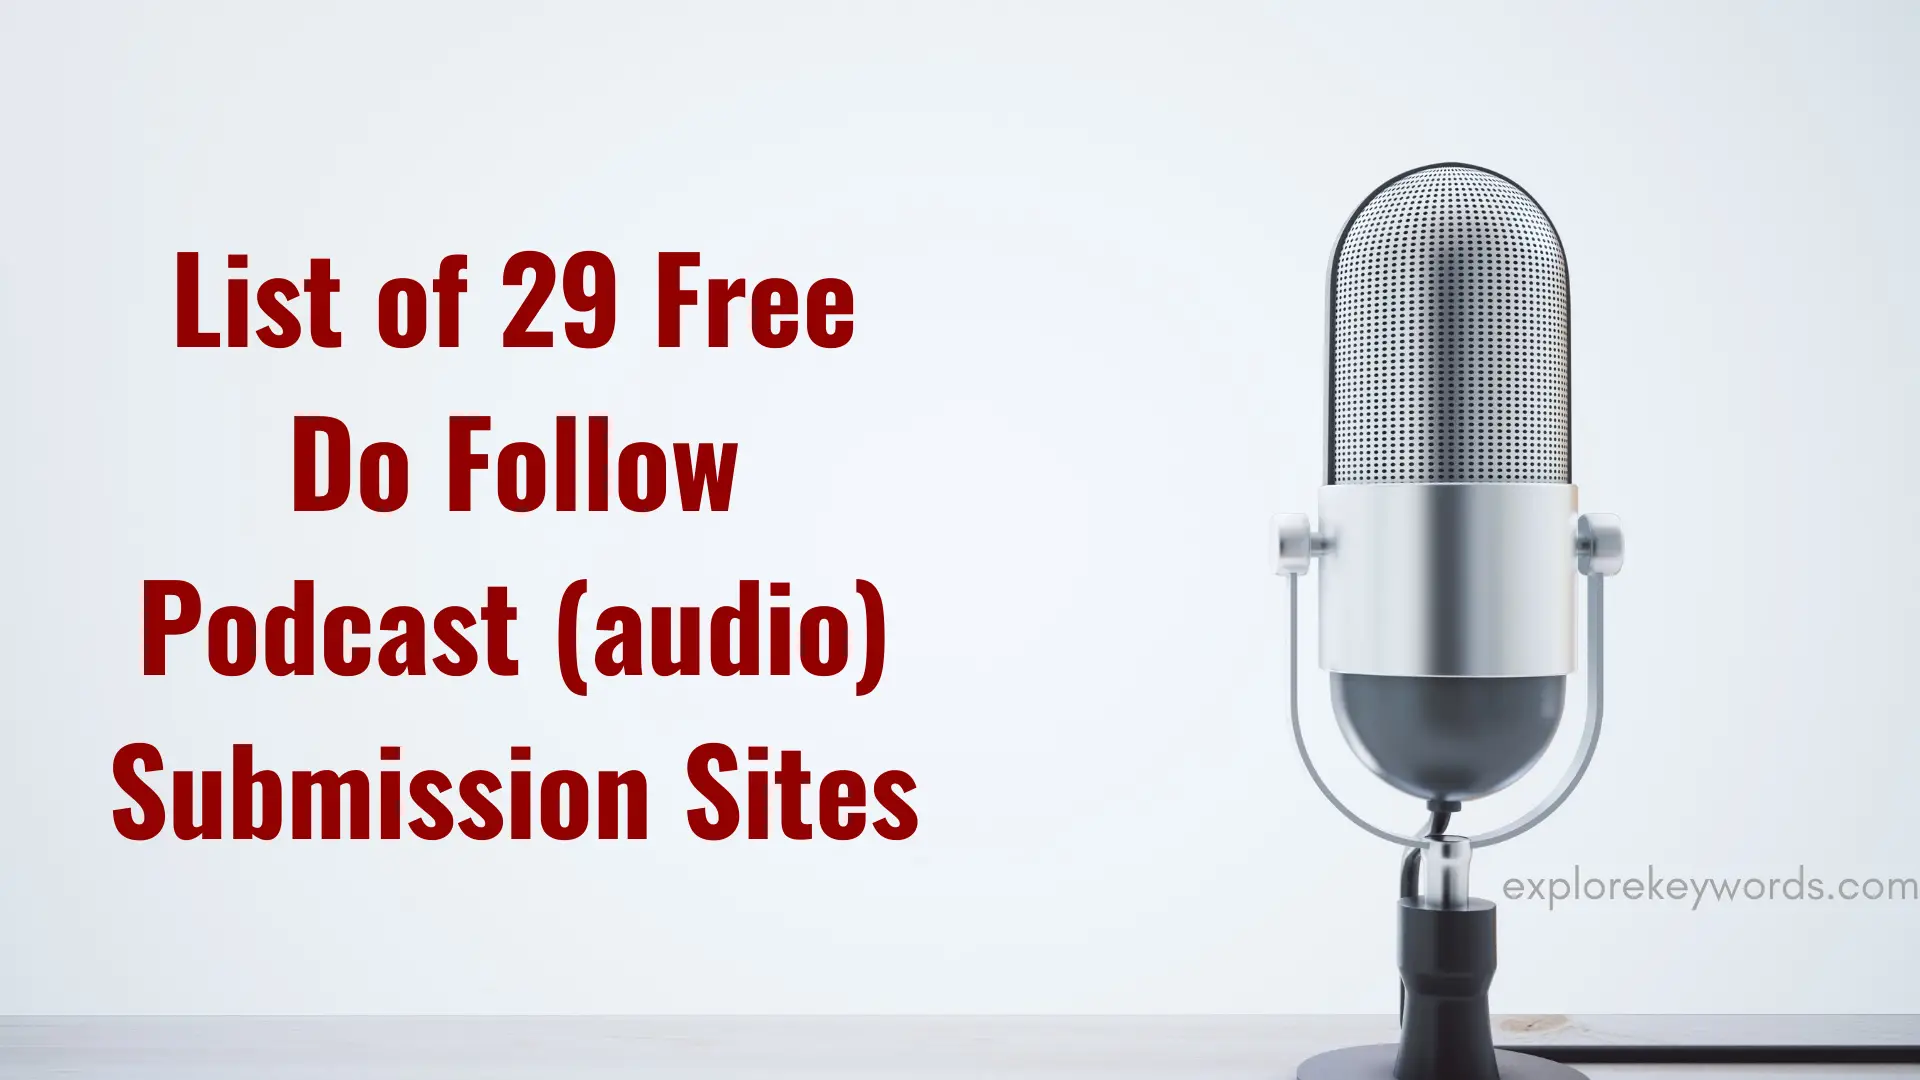 List of 29 Free Do Follow Podcast (audio)Submission Sites